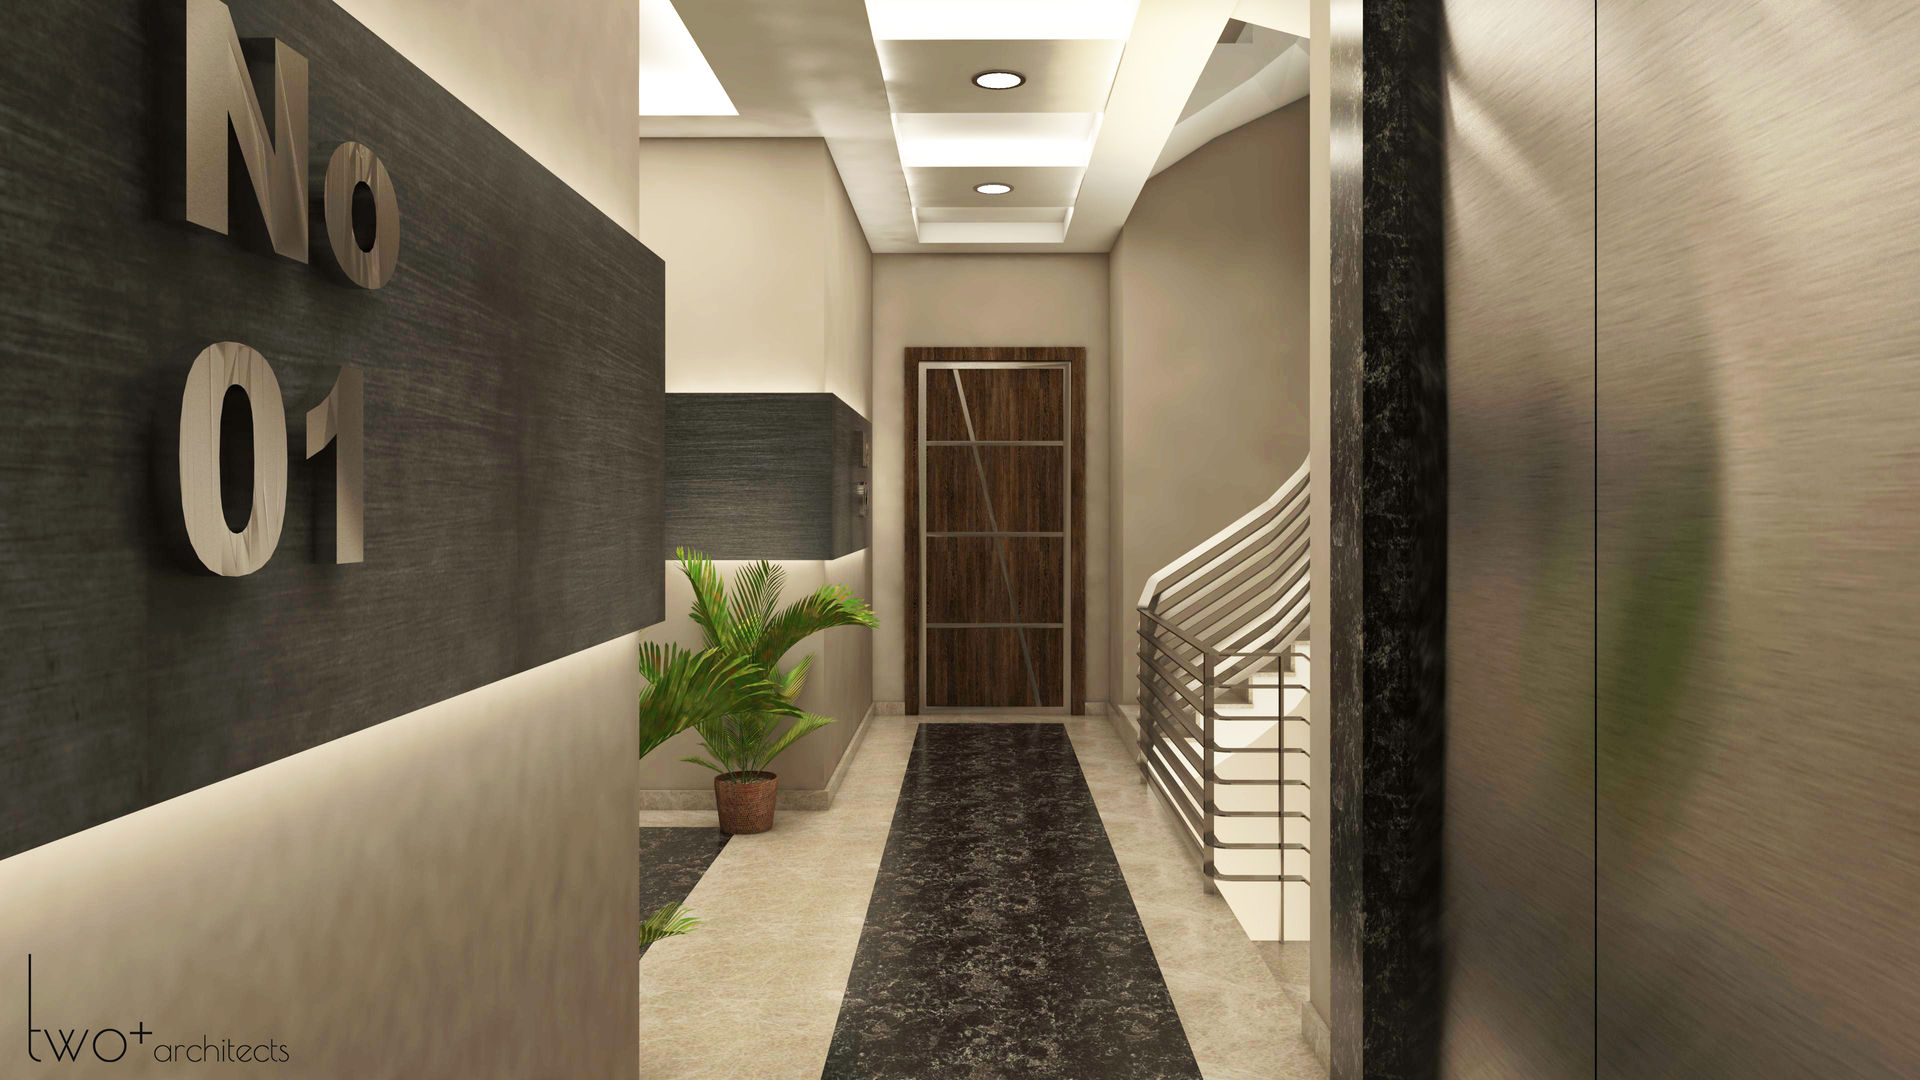 Florya Konut, Two+architects Two+architects Classic style corridor, hallway and stairs